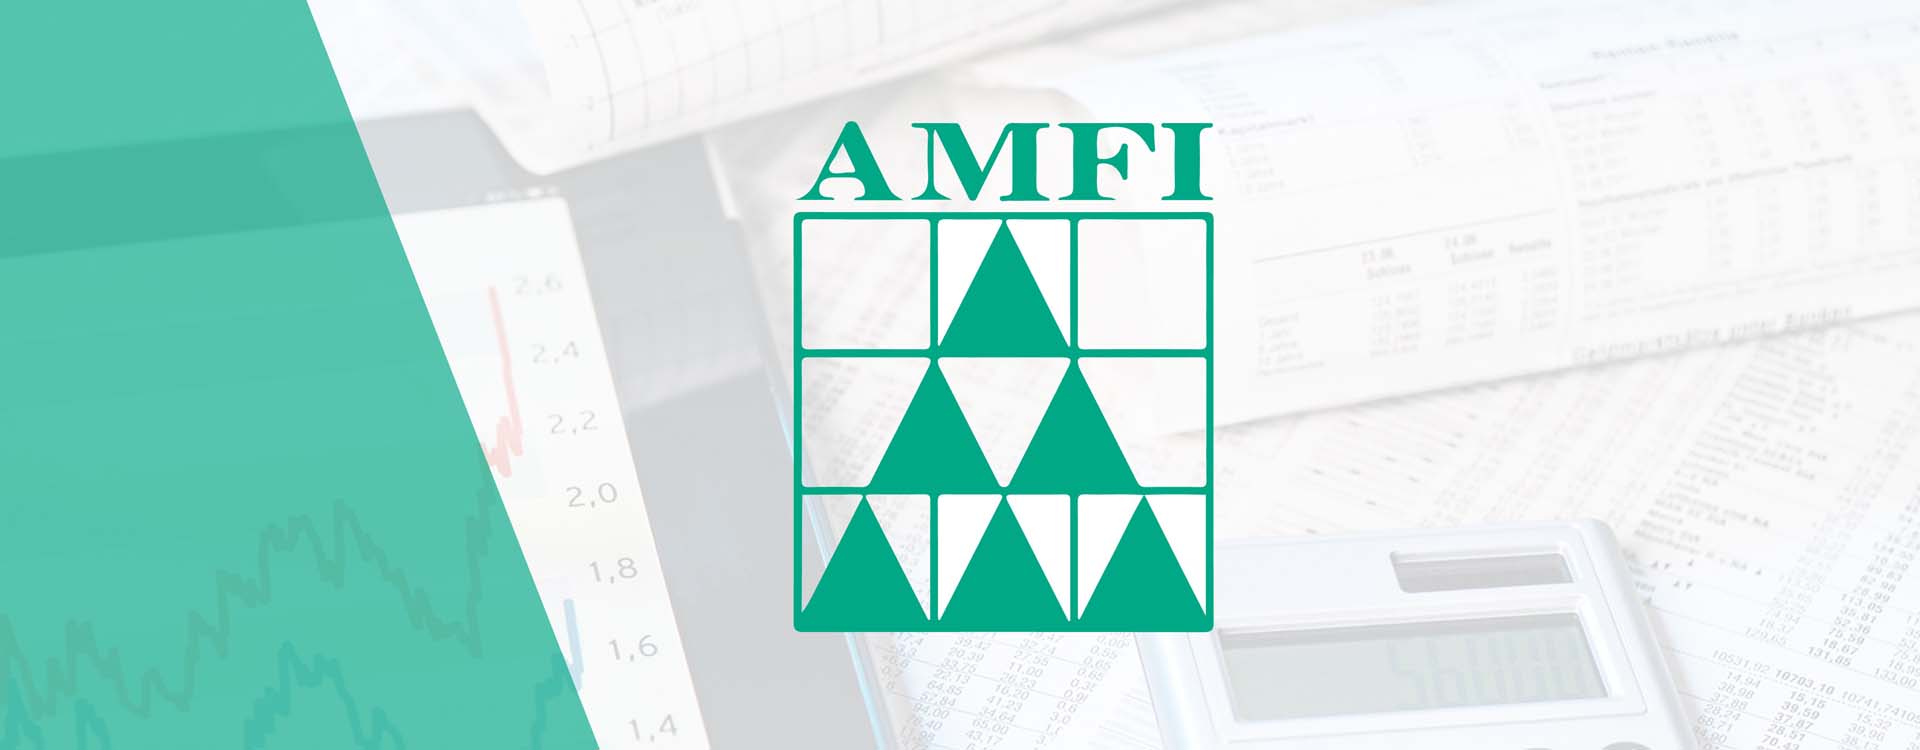 Association of Mutual Funds in India (AMFI): The Referee for Mutual Funds | Dutch Uncles